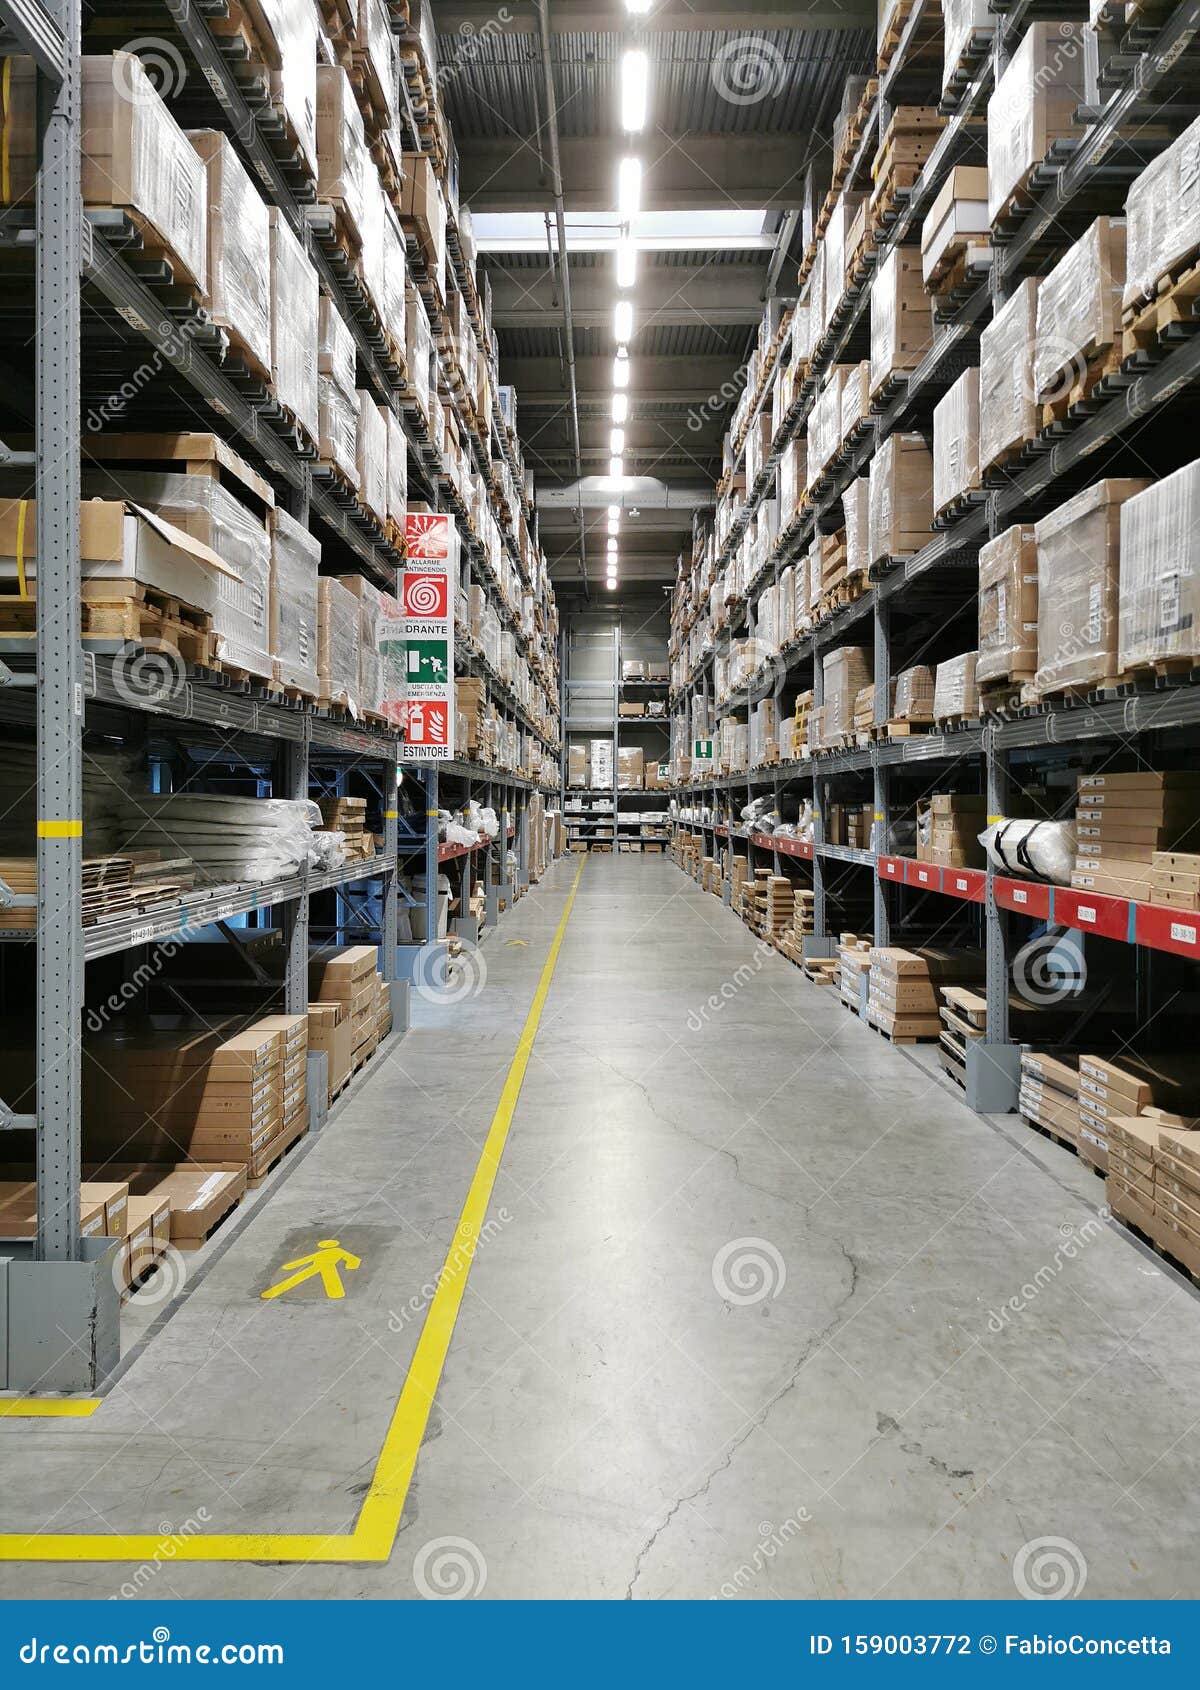 Warehouse Of The Swedish Ikea Store Editorial Photography Image